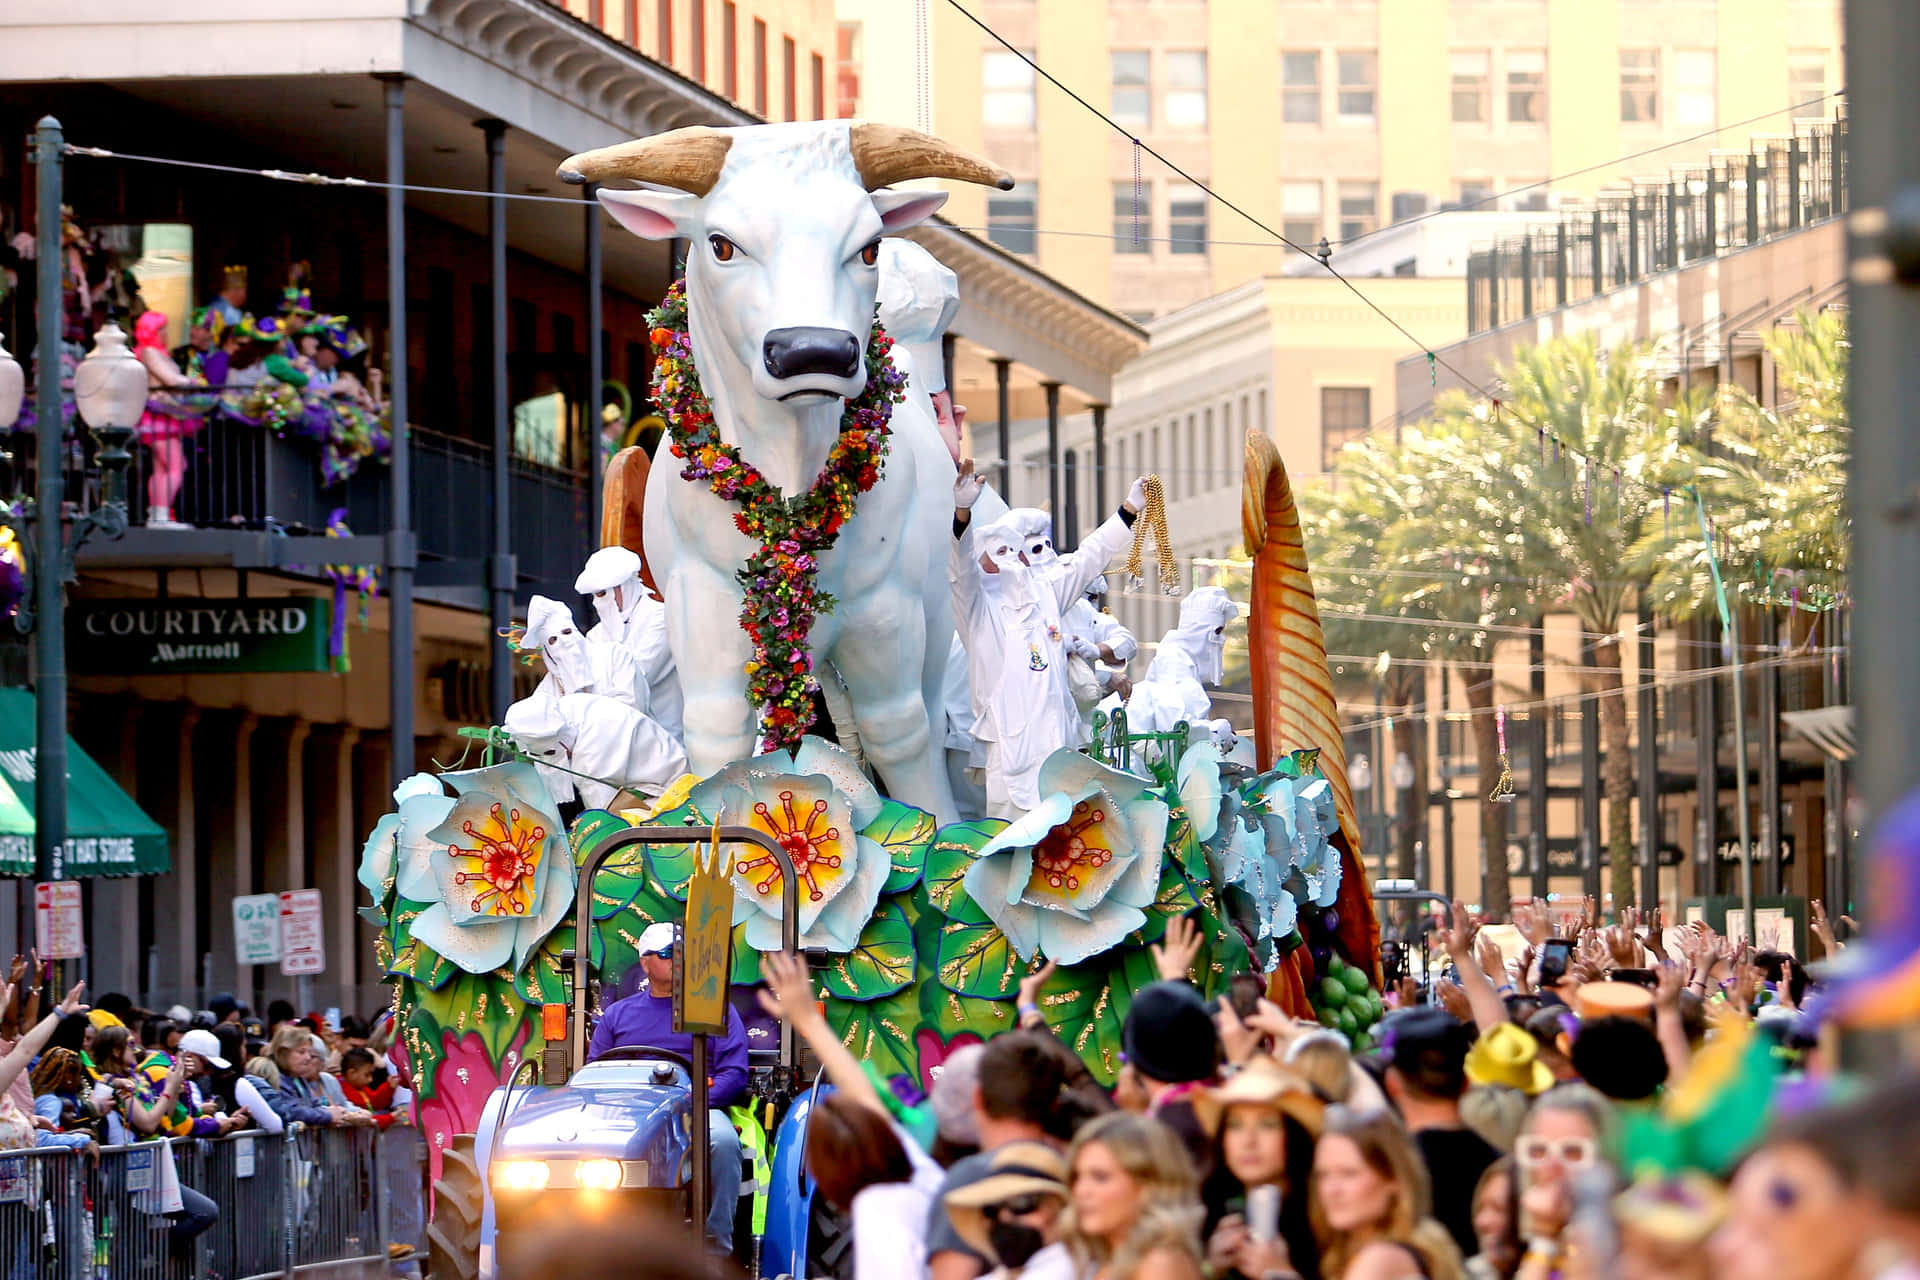 Welcome to the festive world of Mardi Gras!